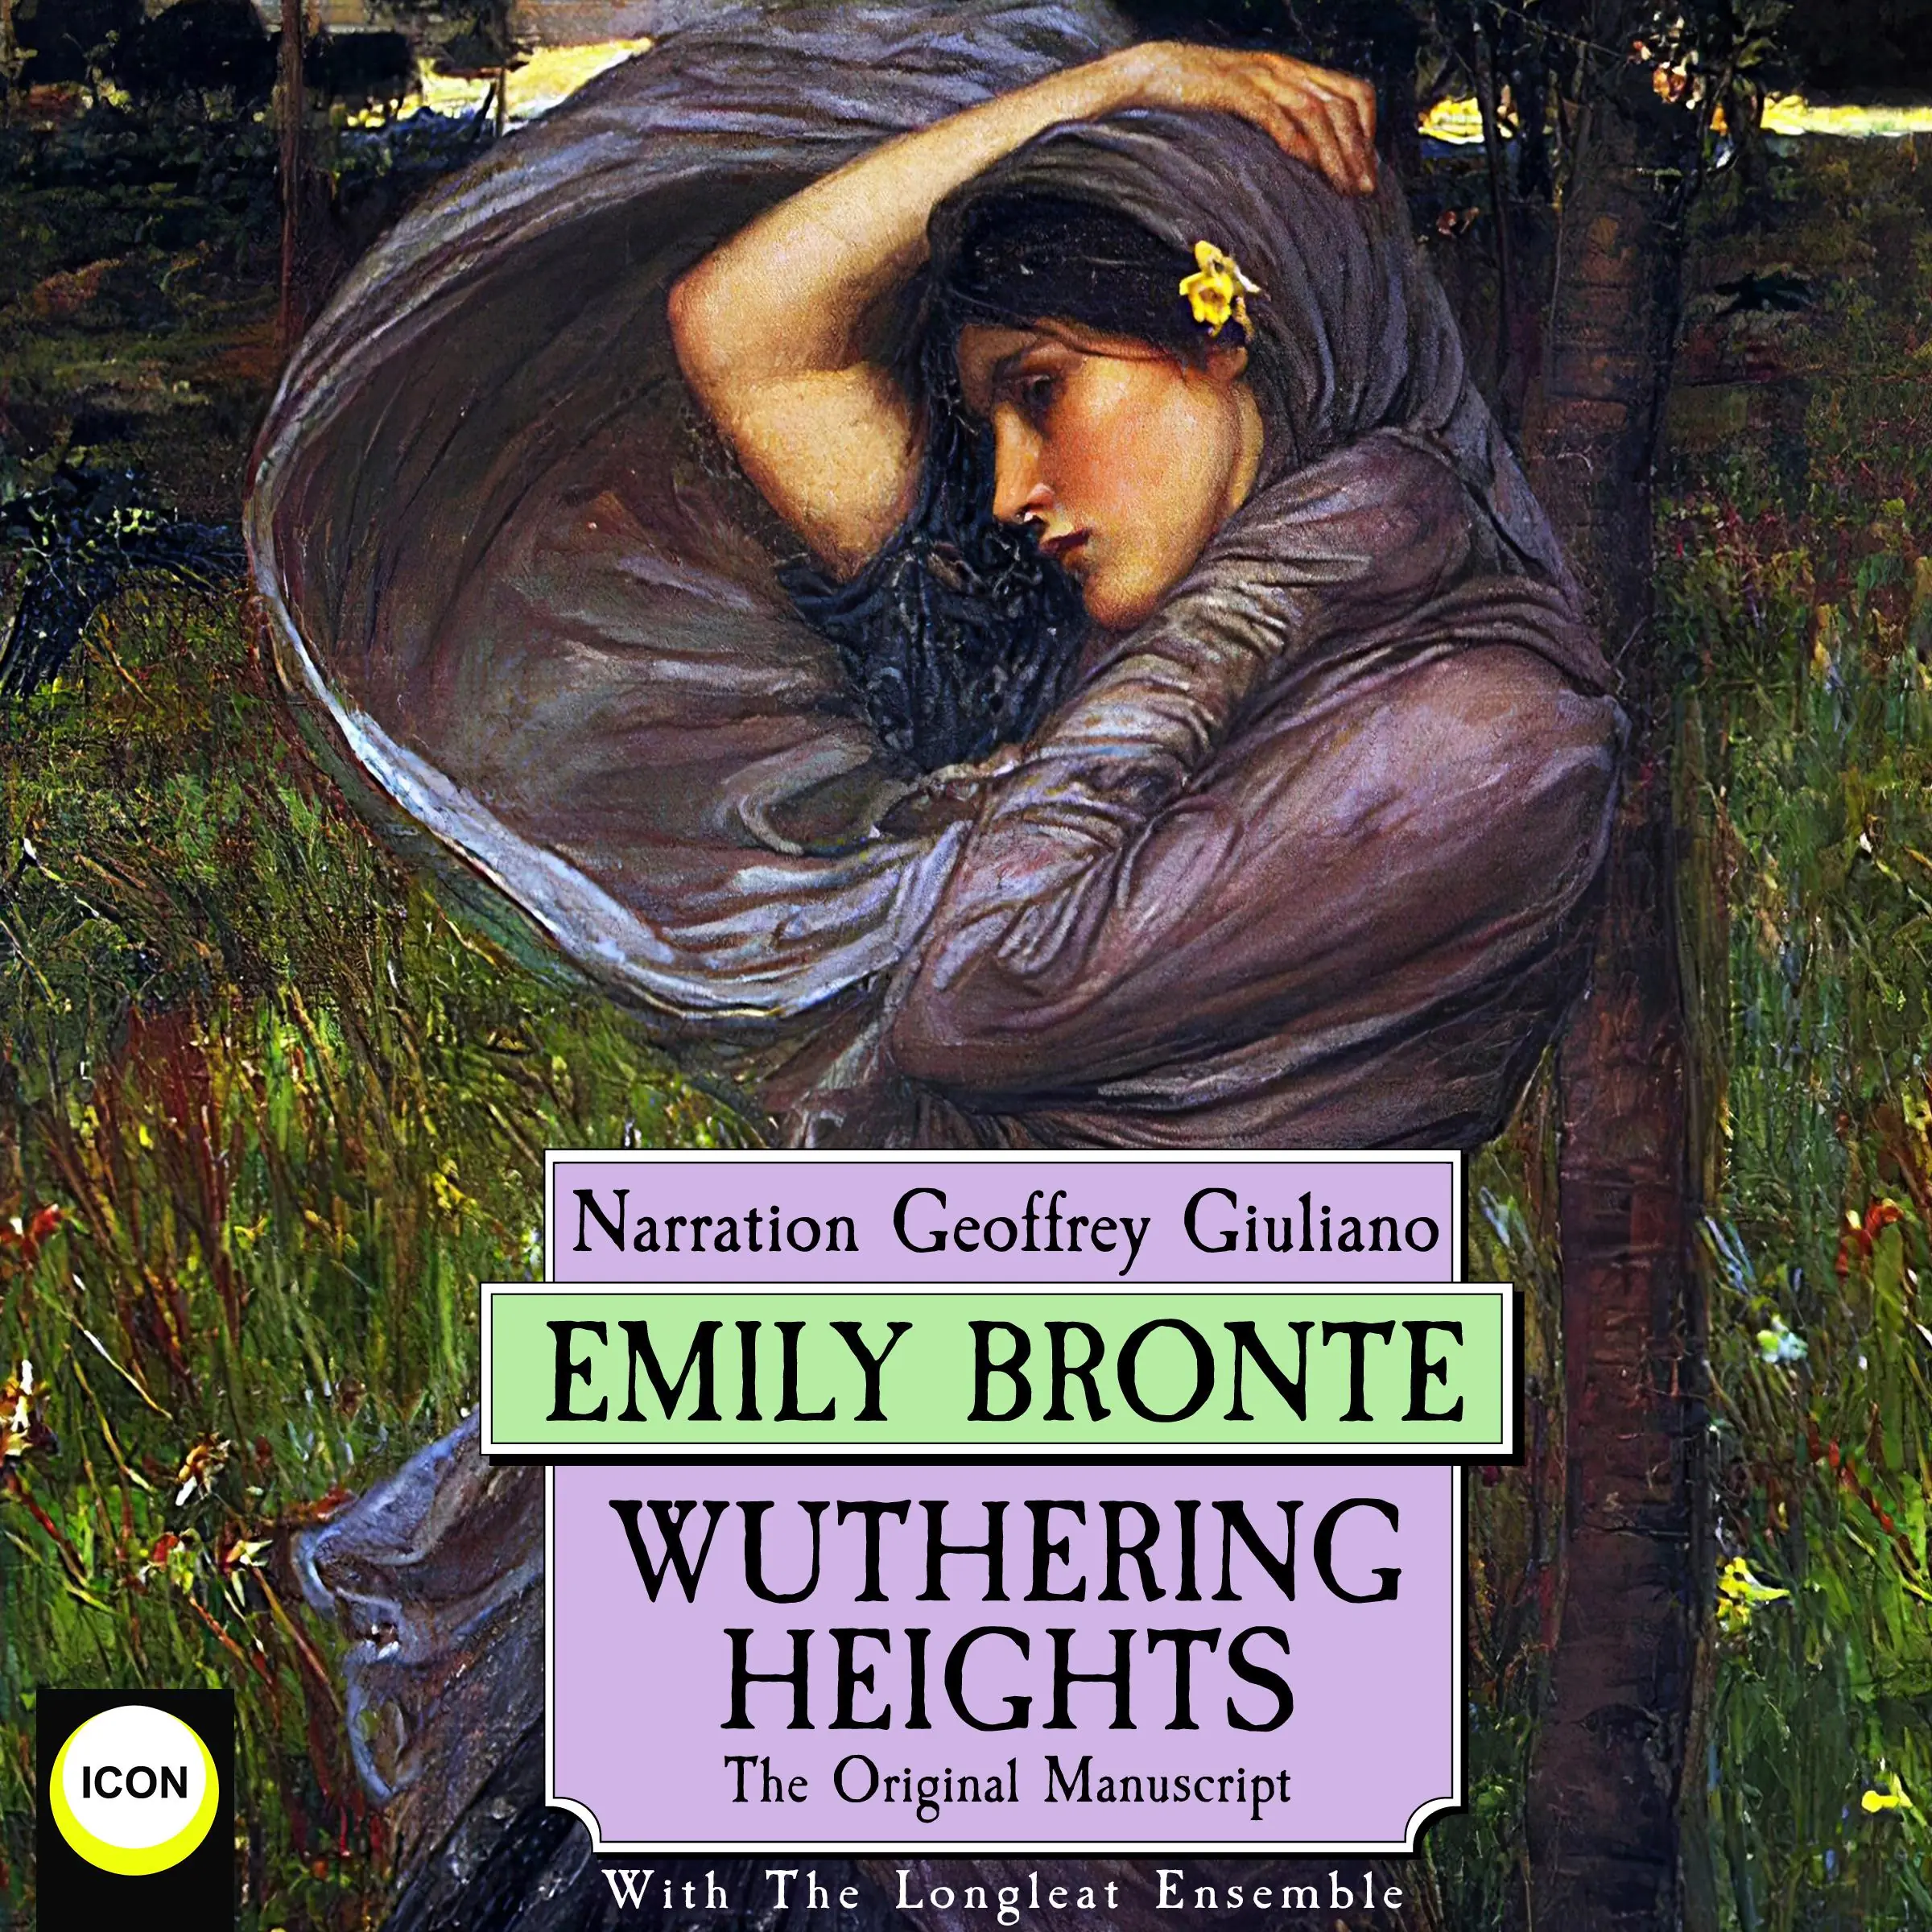 Wuthering Heights The Original Manuscript by Emily Bronte Audiobook